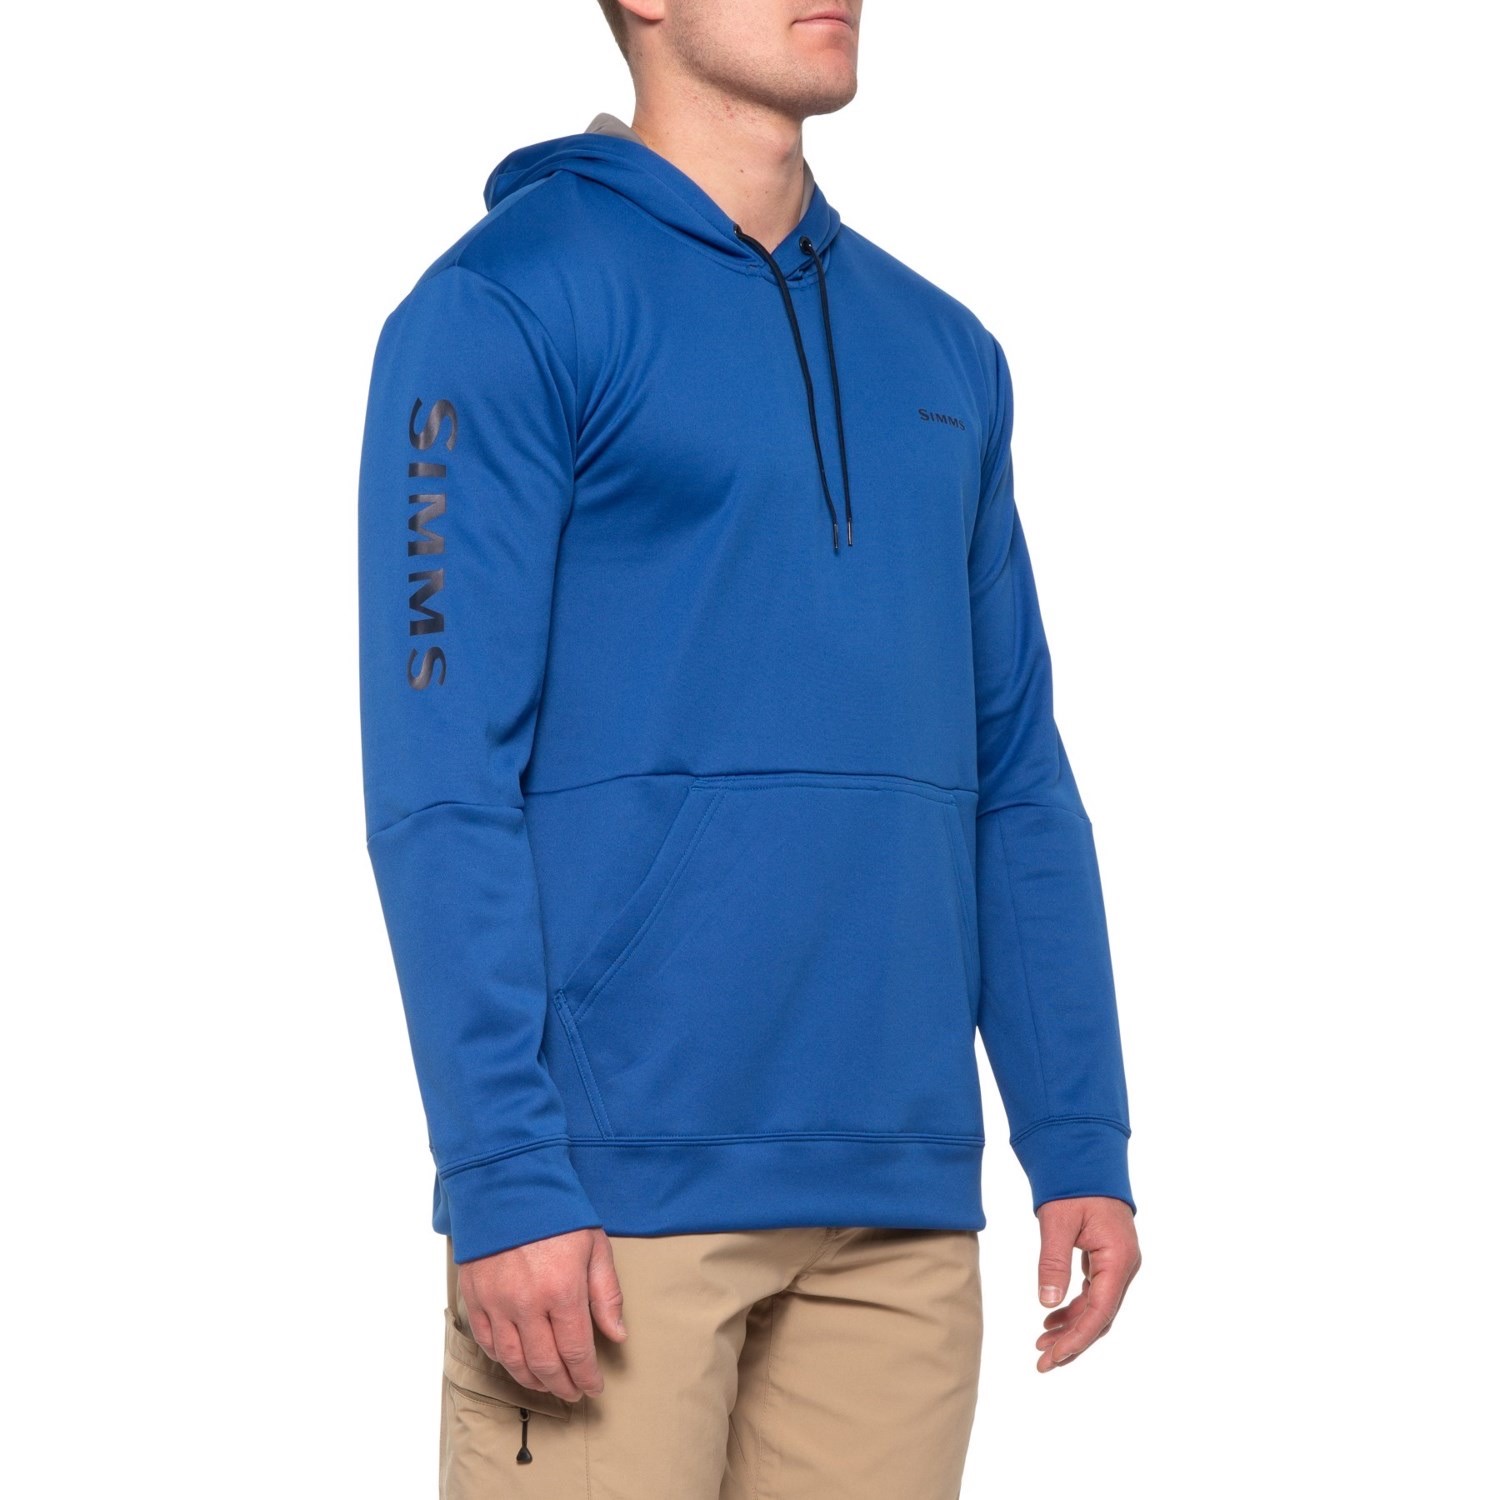 Simms M's Challenger Hoody - Rich Blue - Large